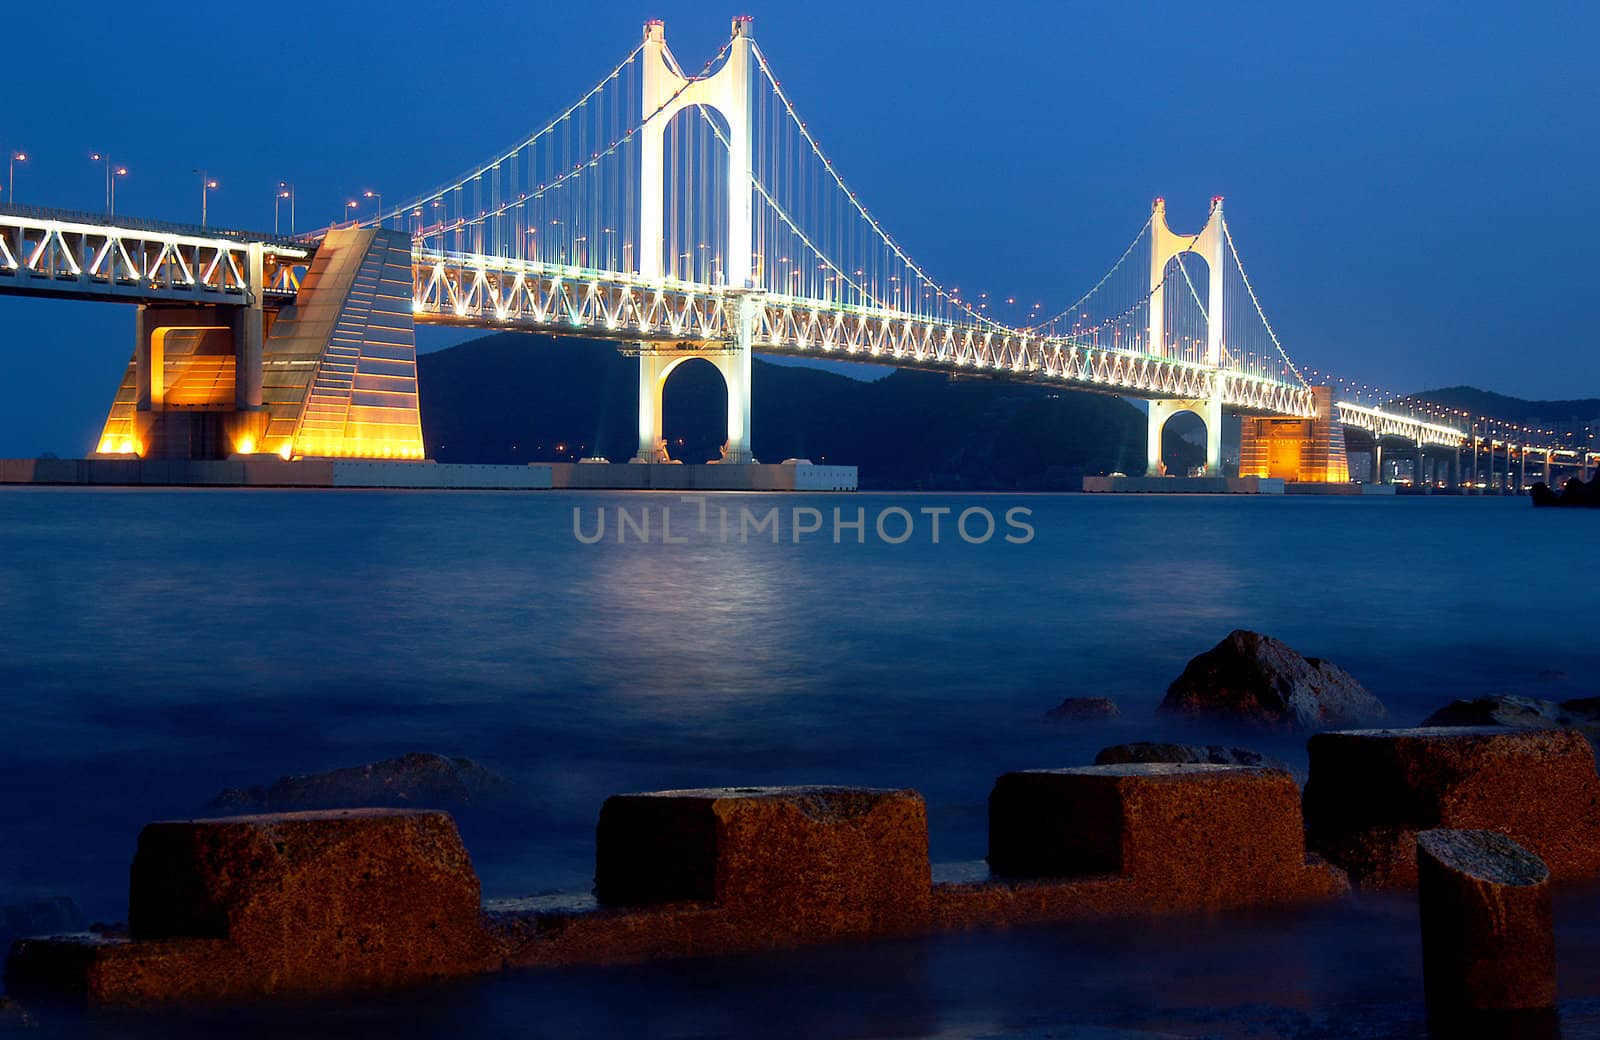  Bridge and Seawall at Dusk. by clickbeetle